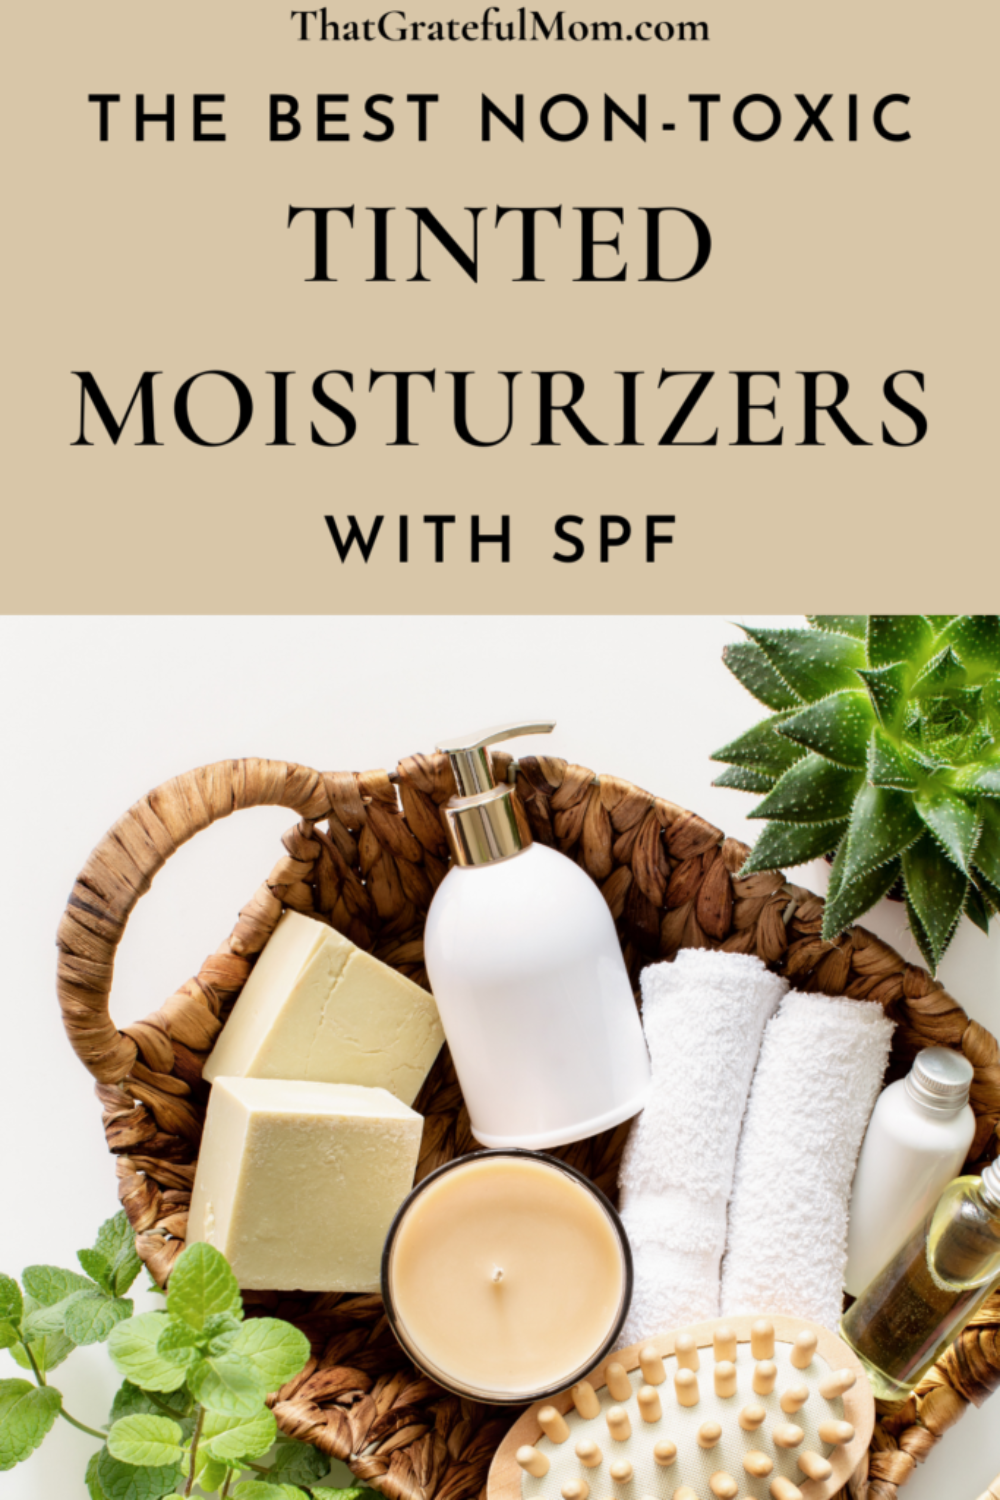 The best non-toxic tinted moisturizer pin 3